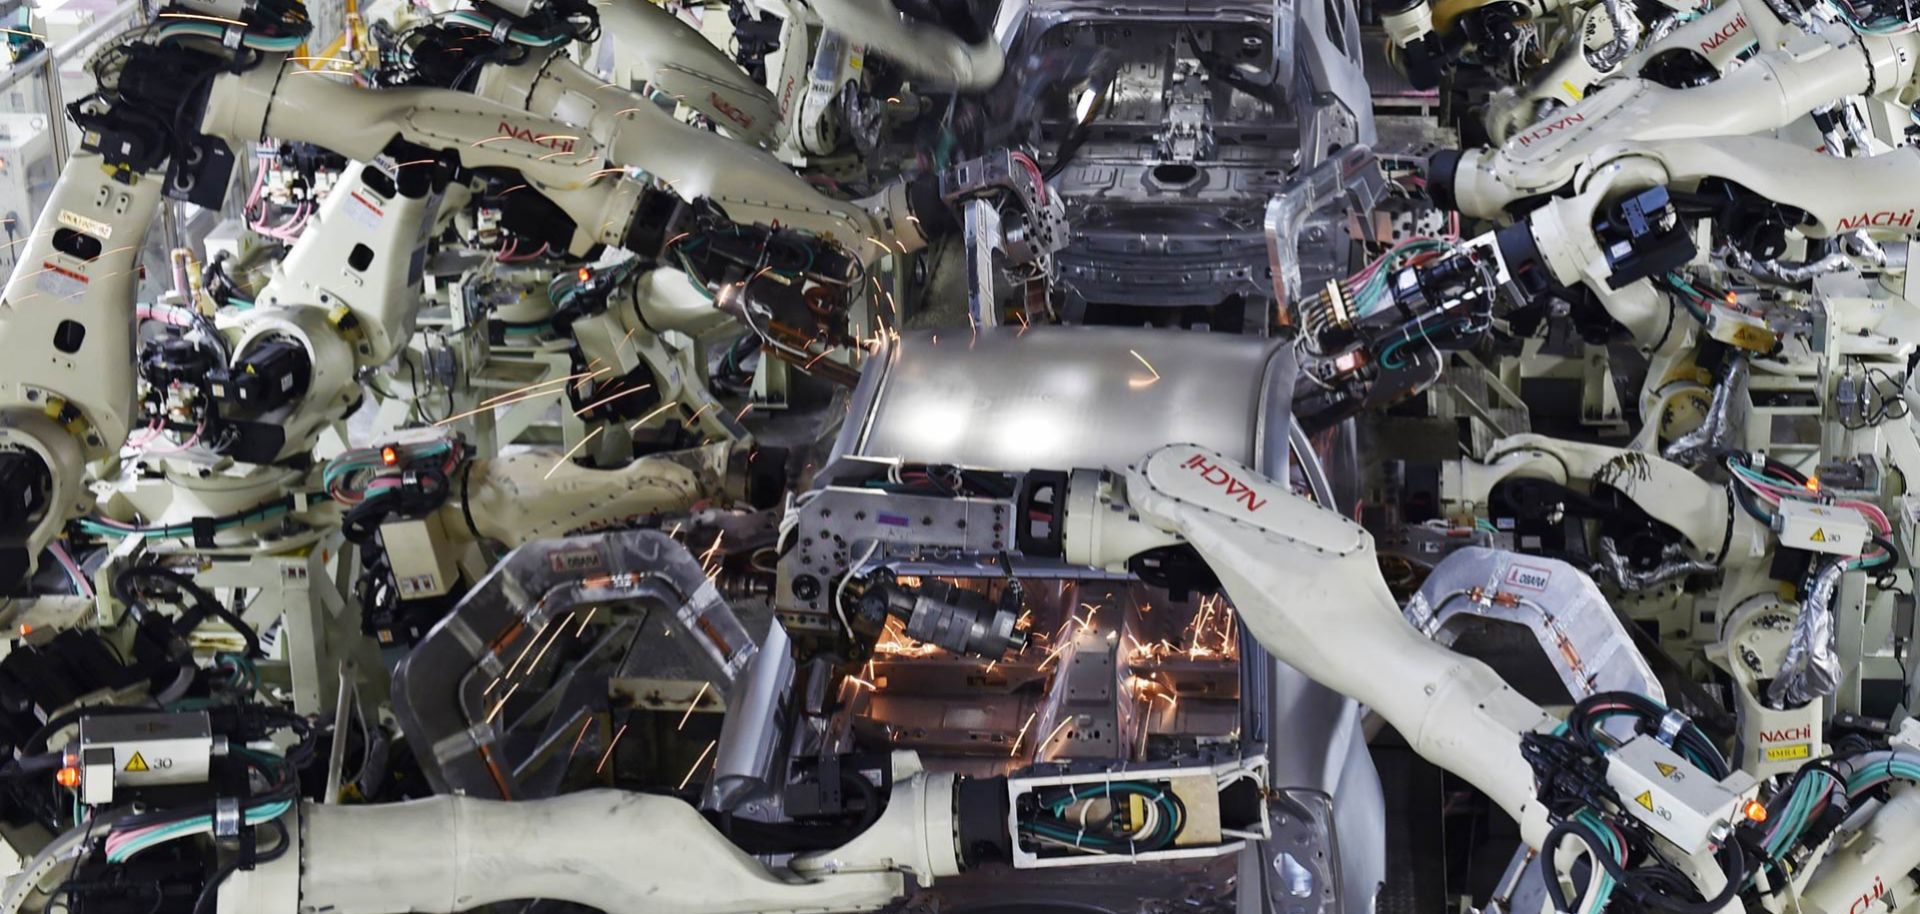 Automated welding machine robots assemble automobile bodies at Toyota Motor's Tsutsumi plant in Toyota, Japan.